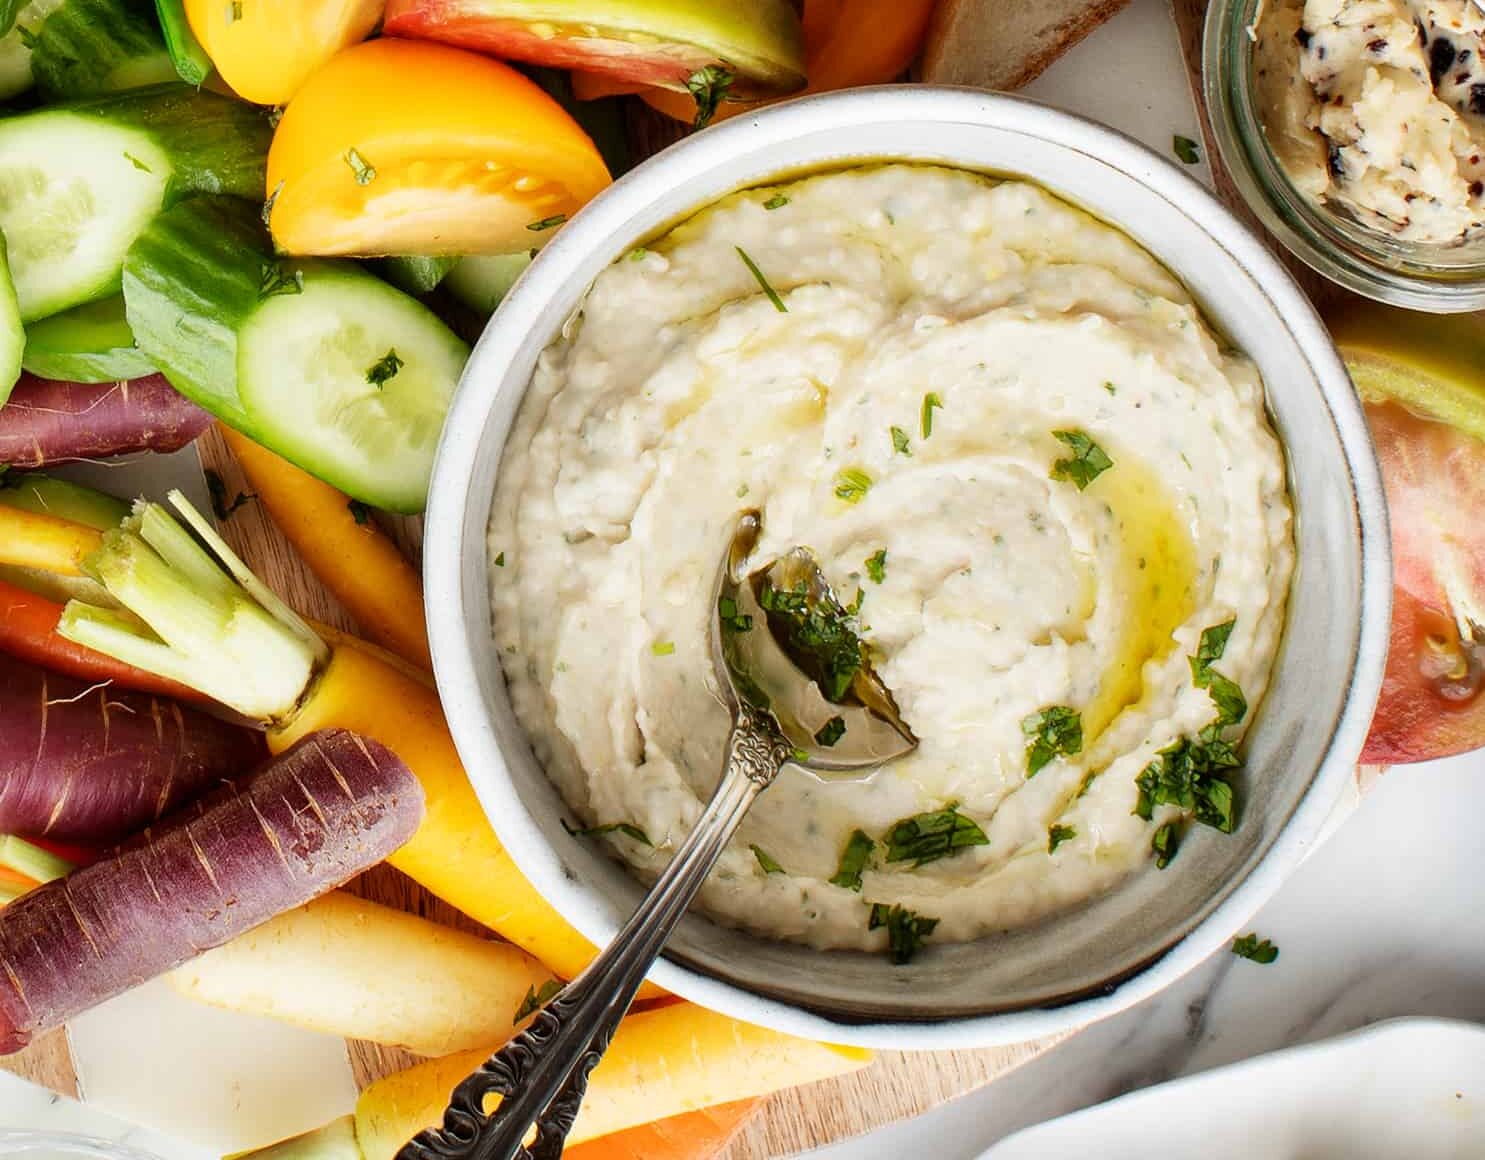 Cannellini bean dip with vegetables